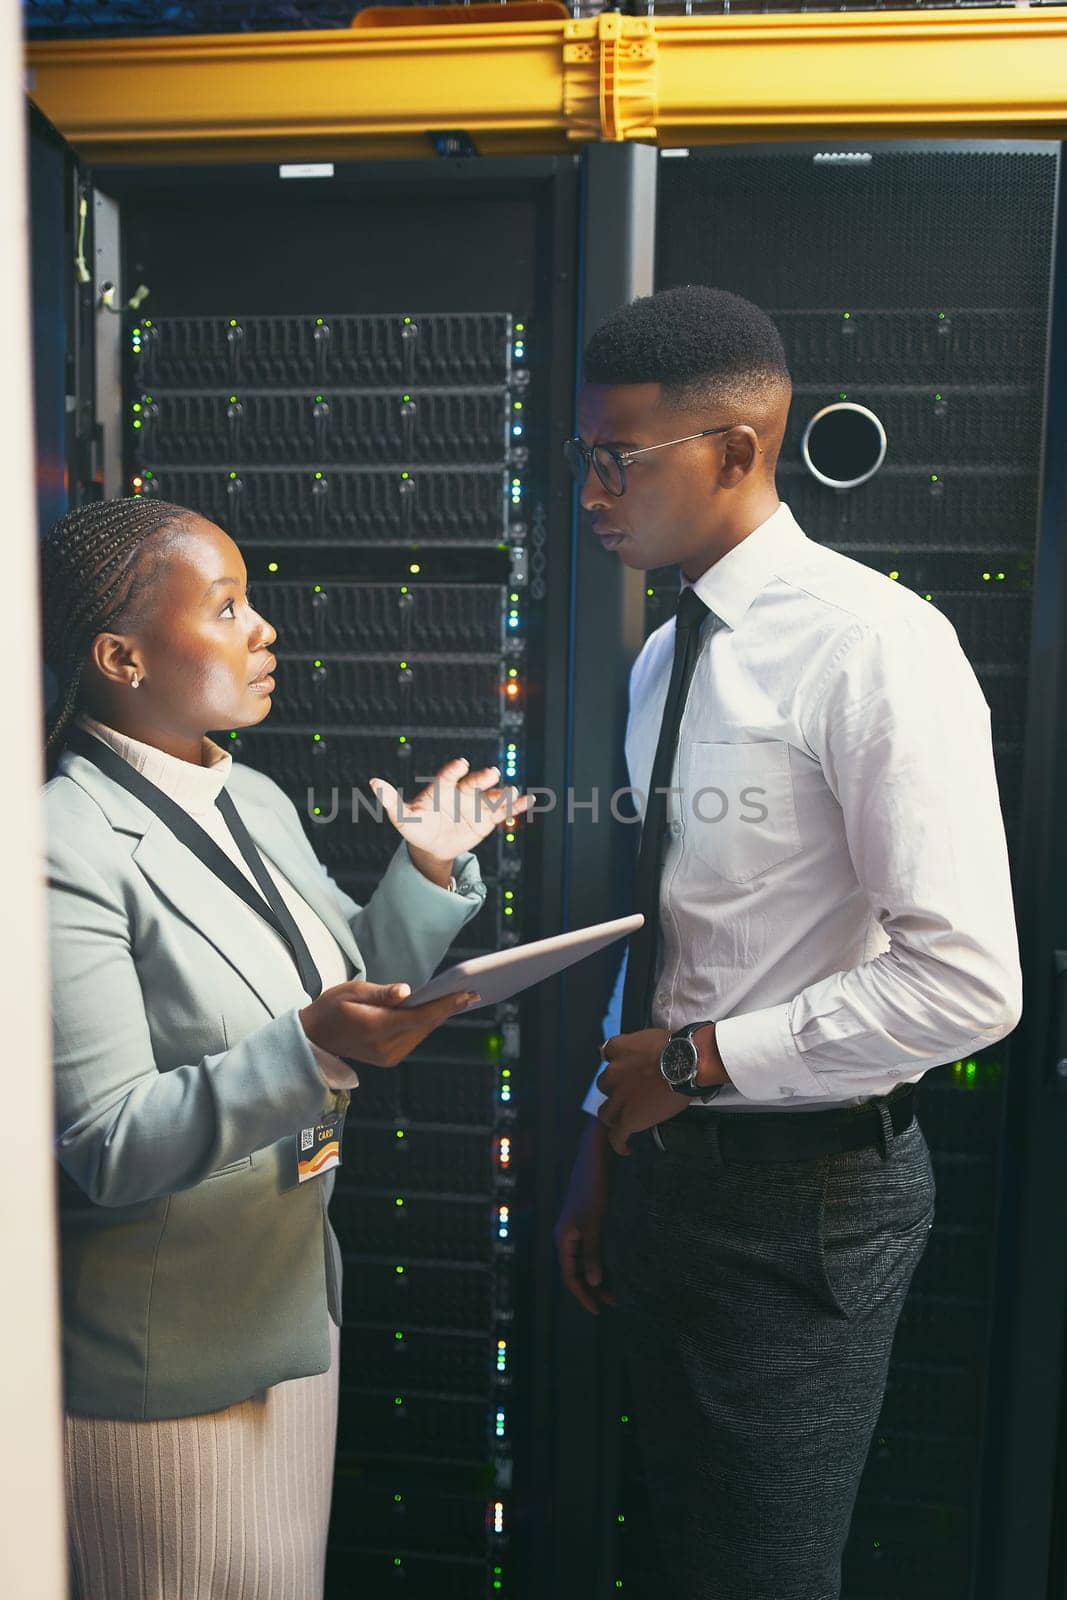 Please help me with this. two young IT specialists standing in the server room and having a discussion while using a digital tablet